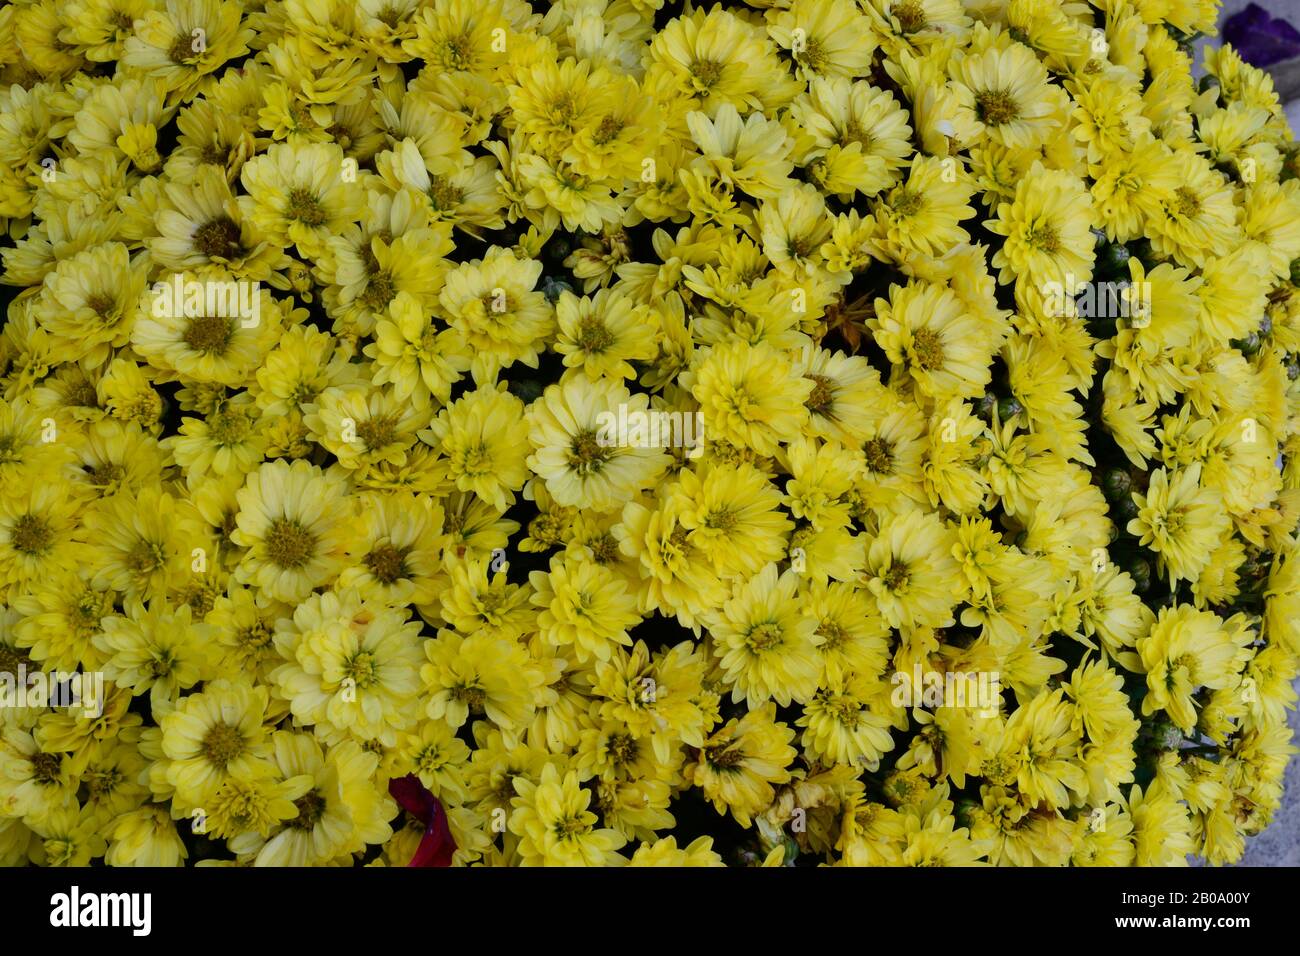 Chrysanthemum. Name Eastern Star. Close up of a mass of yellow flowers Stock Photo